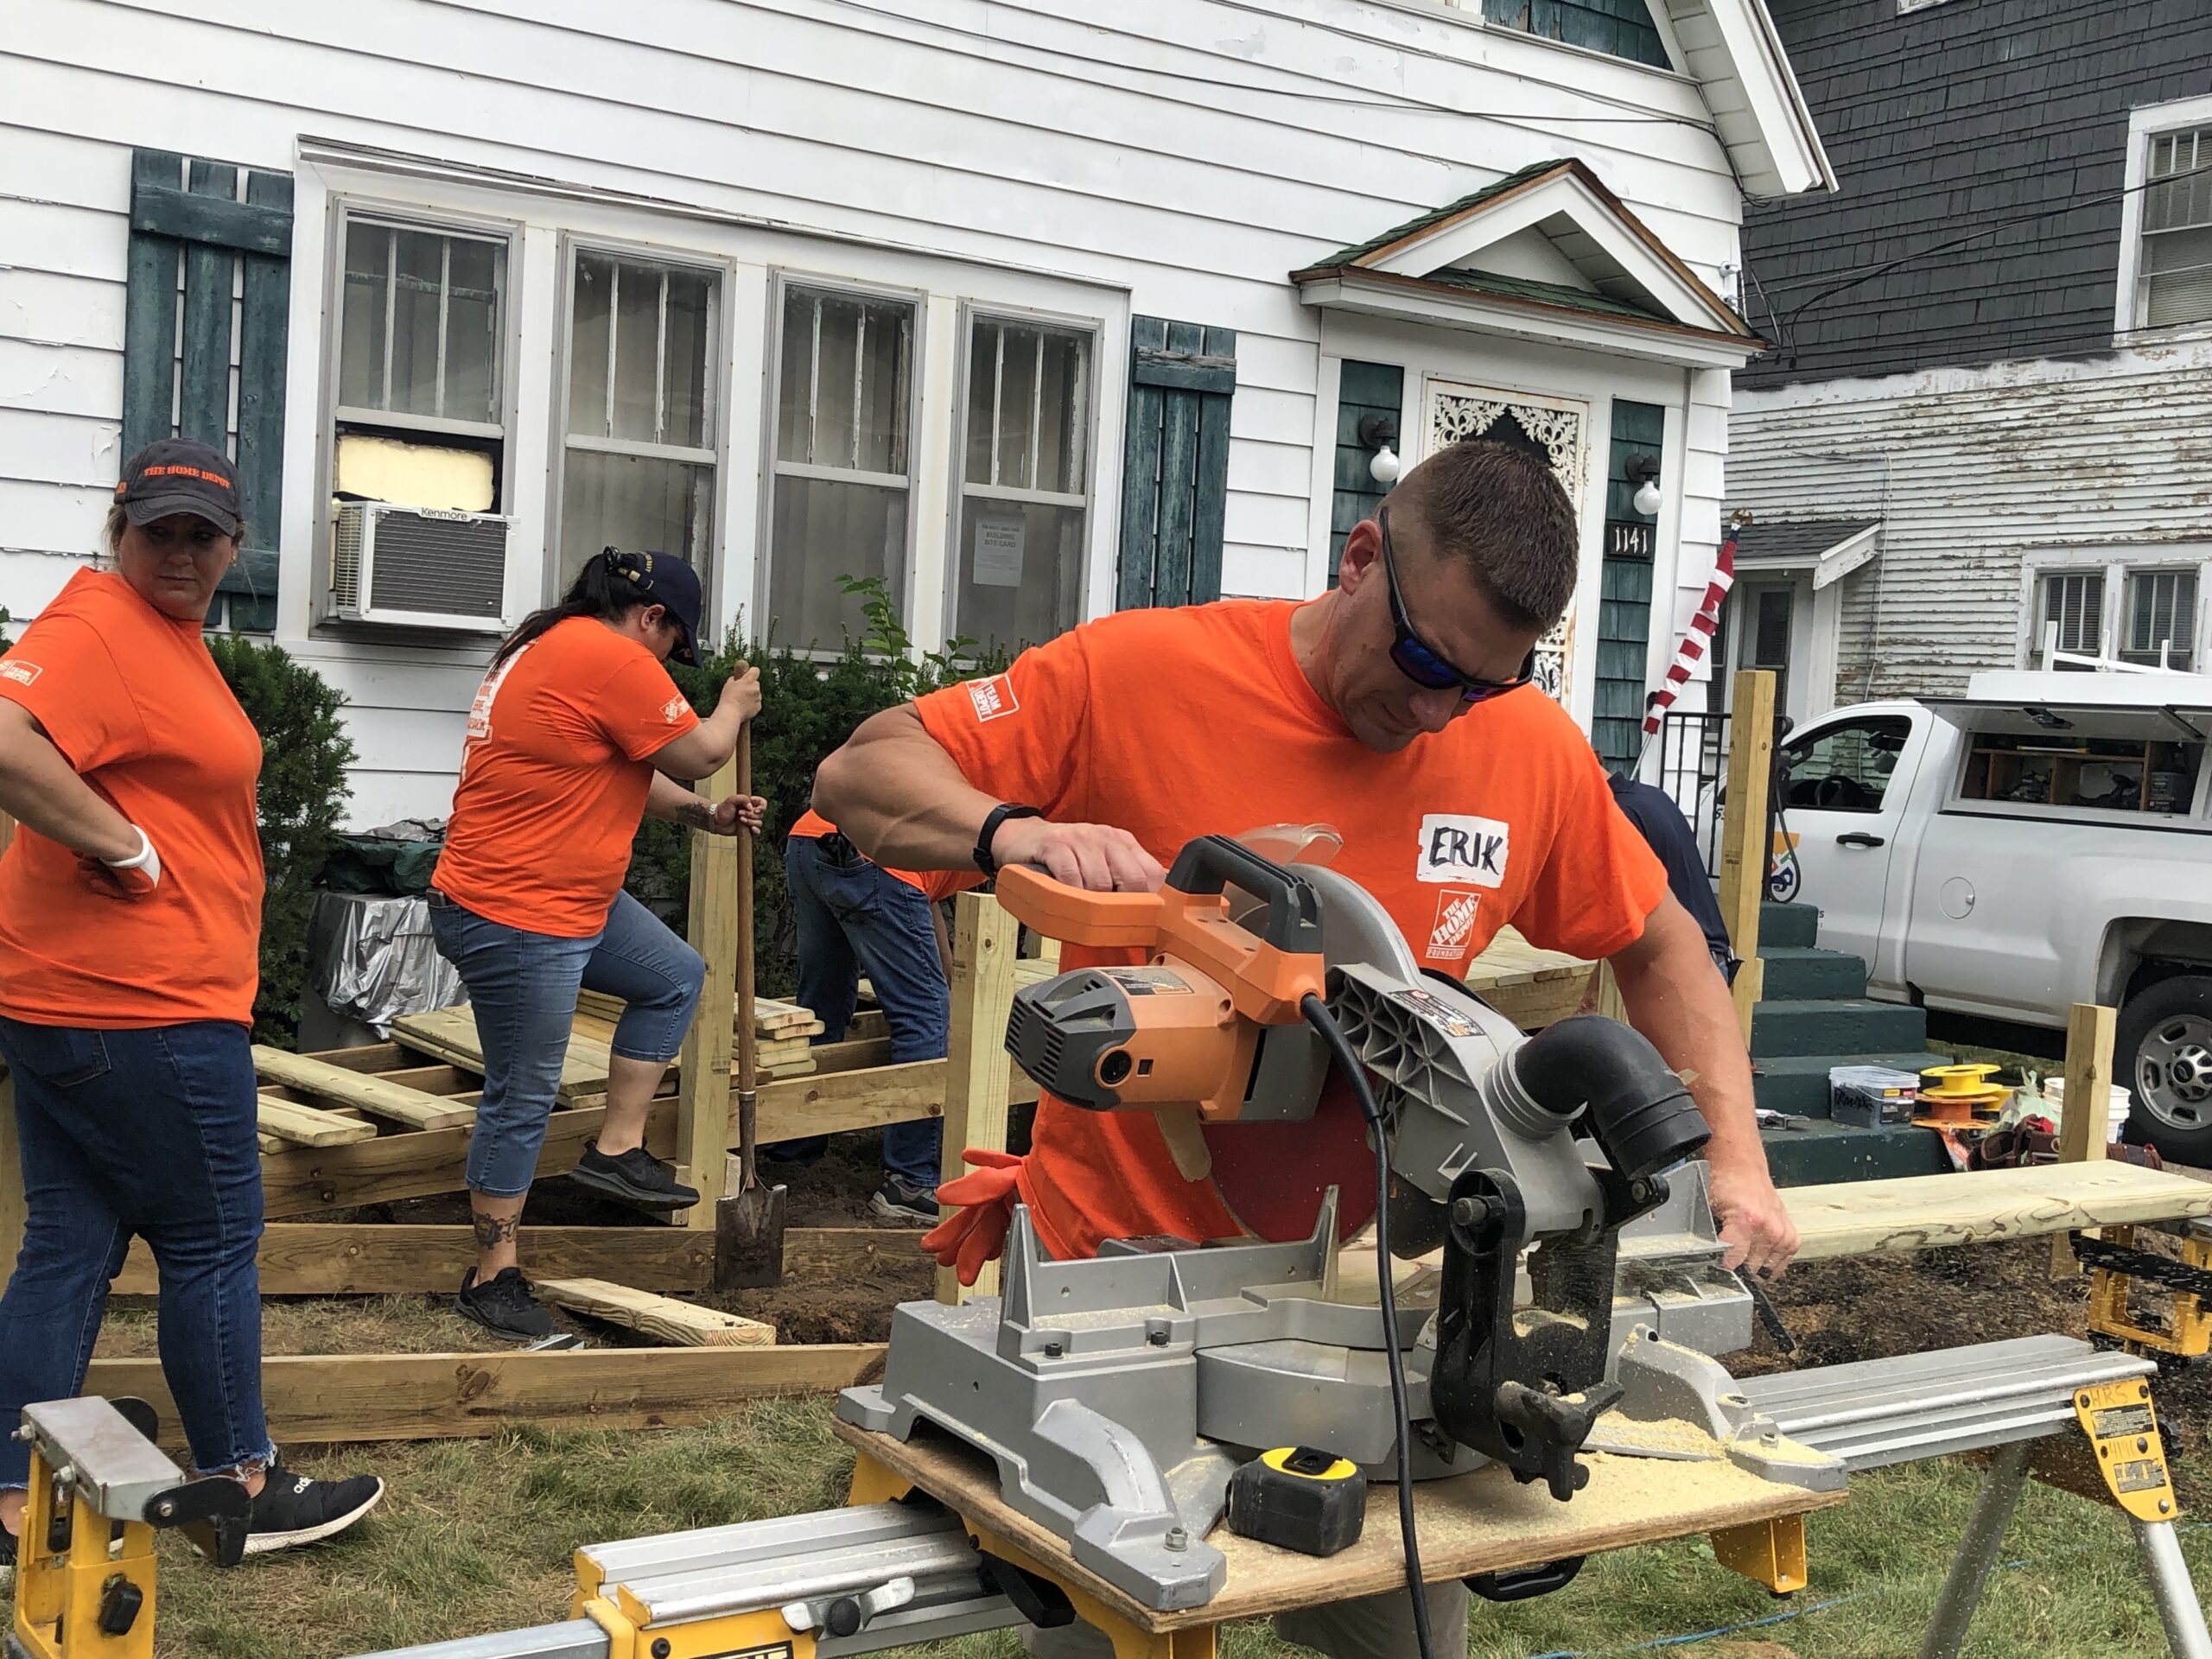 Gigawatt Group worked with Meals on Wheels America and the Home Depot Foundation.